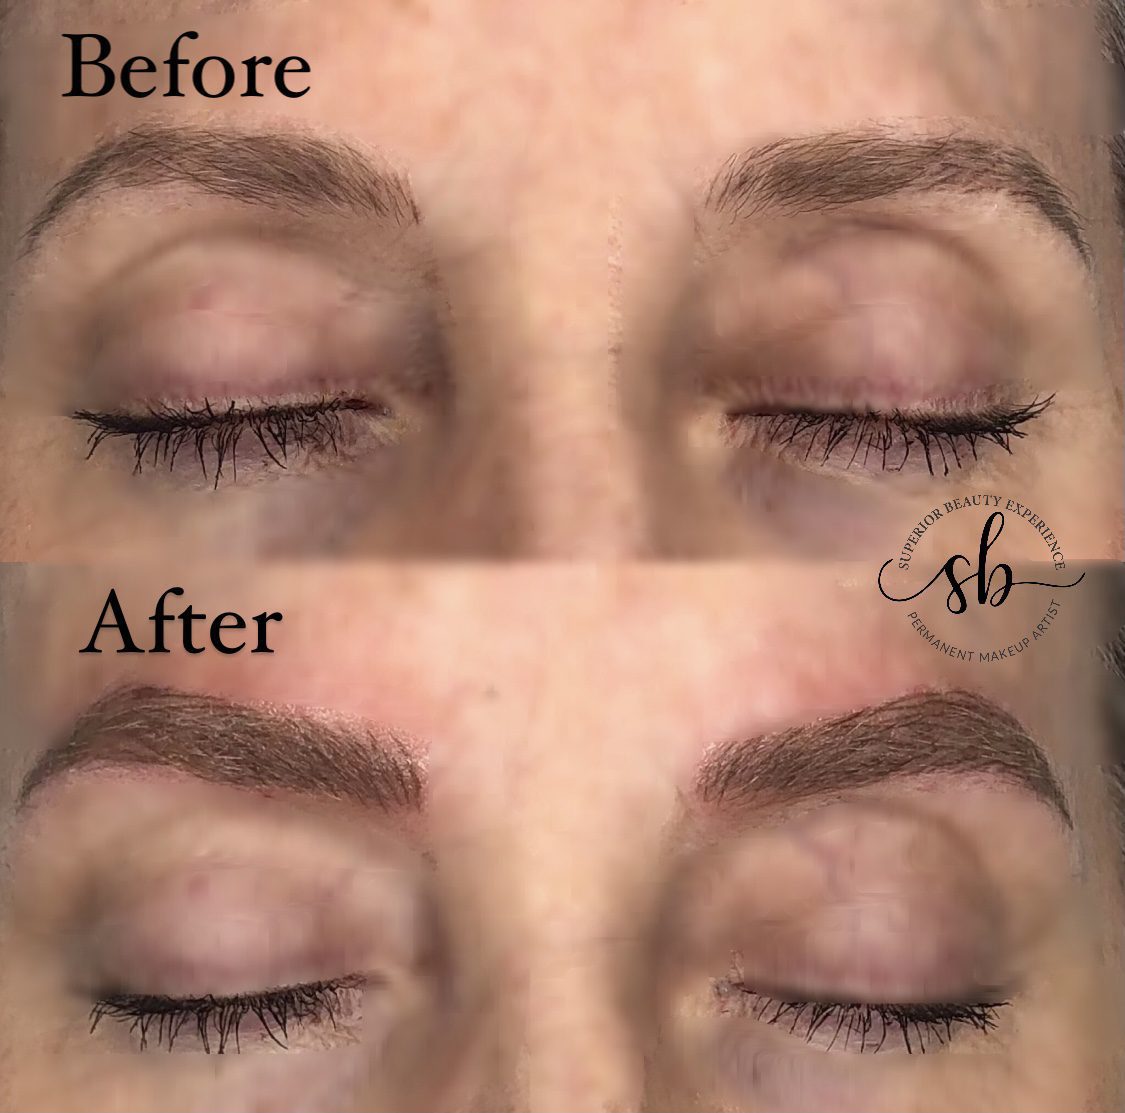 before & after brows service - superior beauty experience waco texas